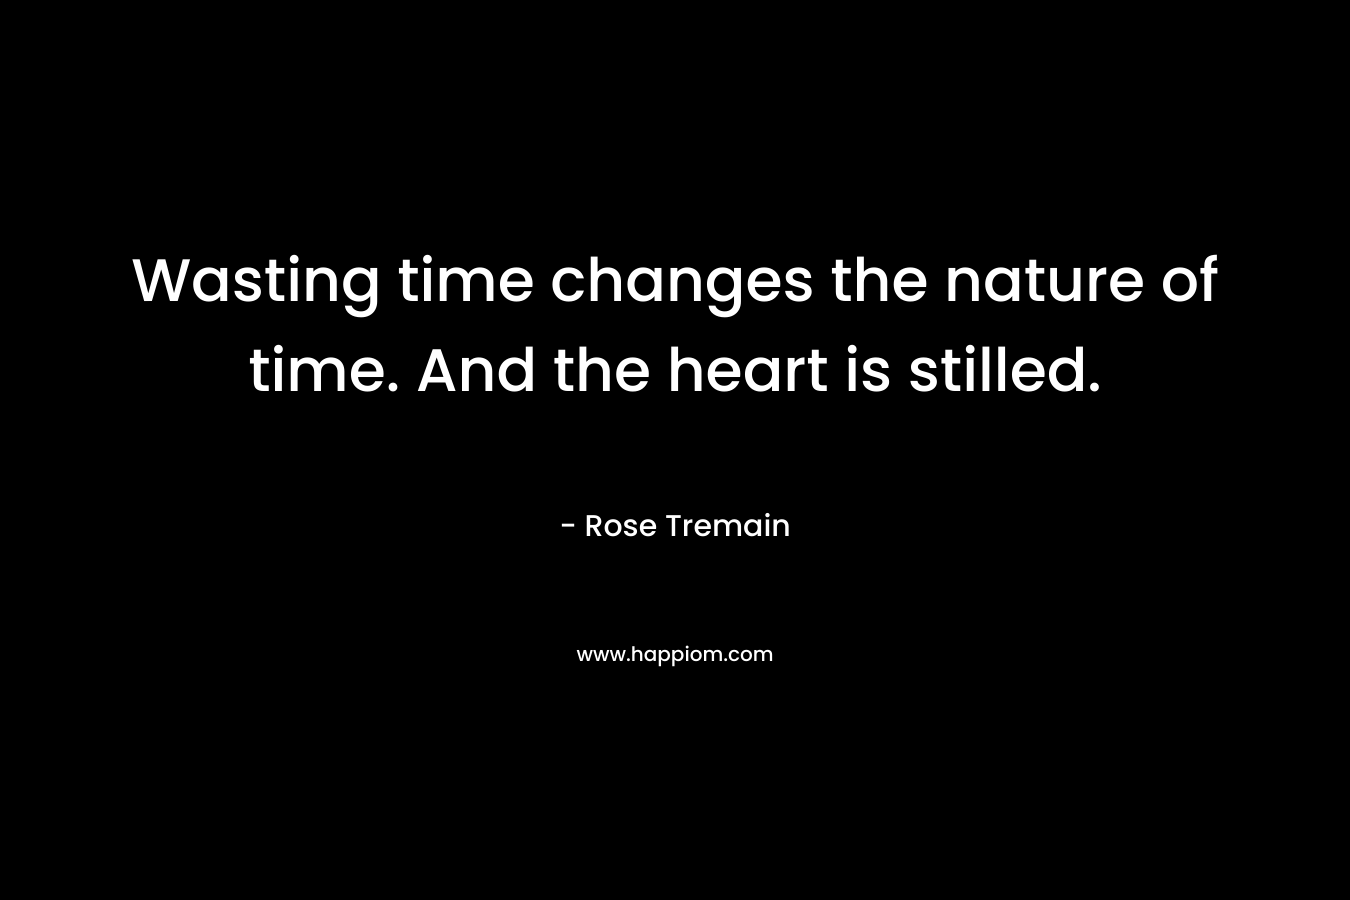 Wasting time changes the nature of time. And the heart is stilled.